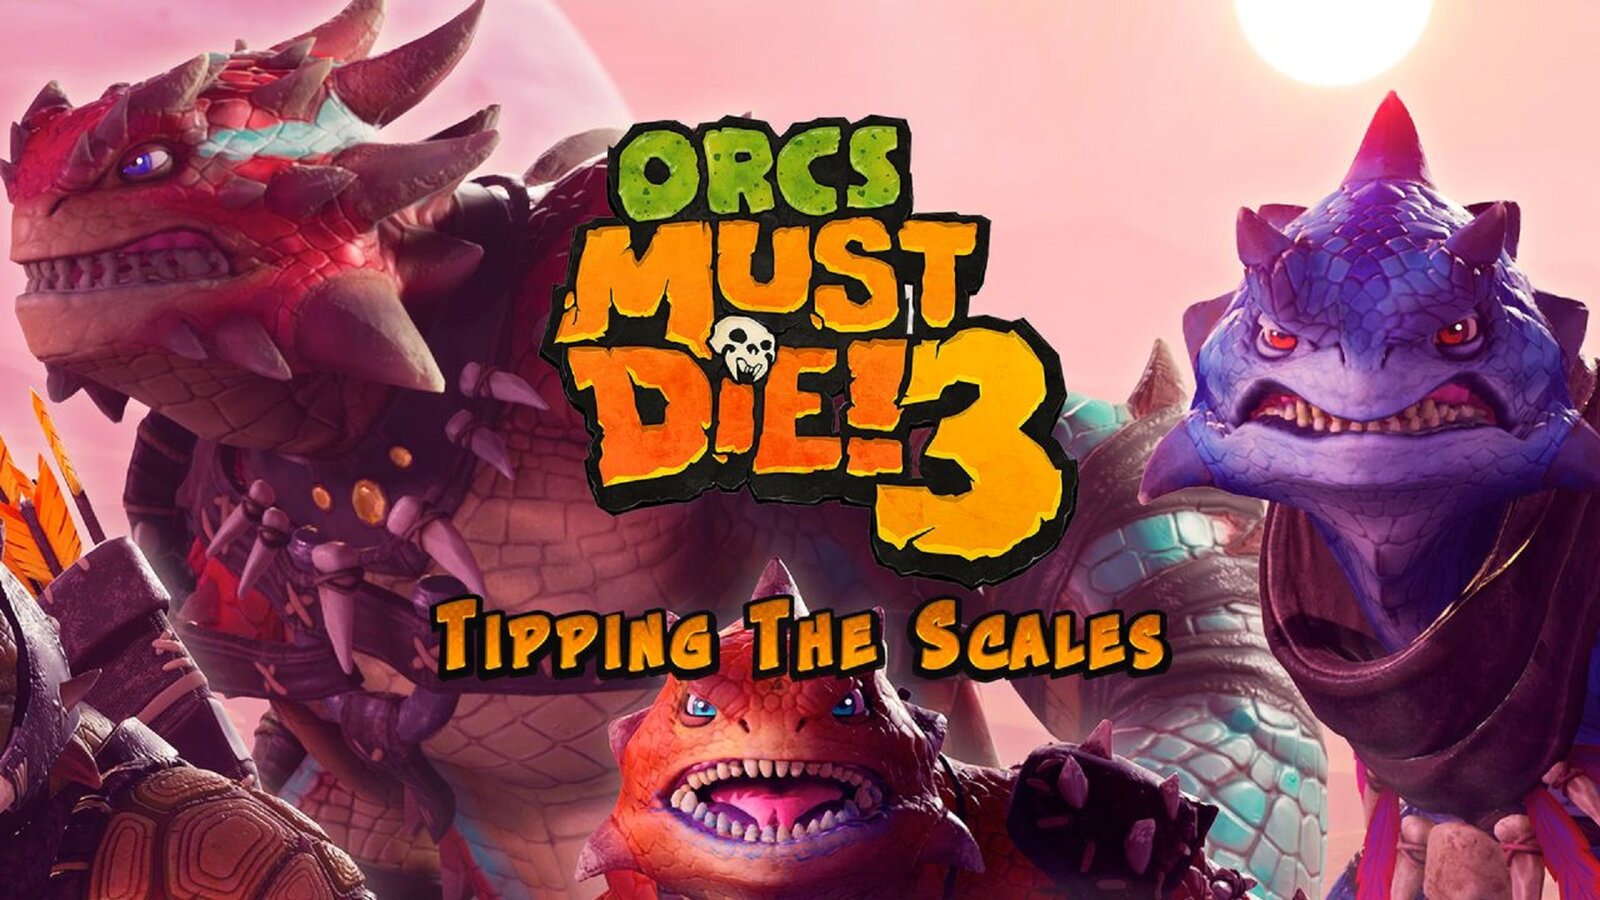 Orcs Must Die! 3 - Tipping the Scales